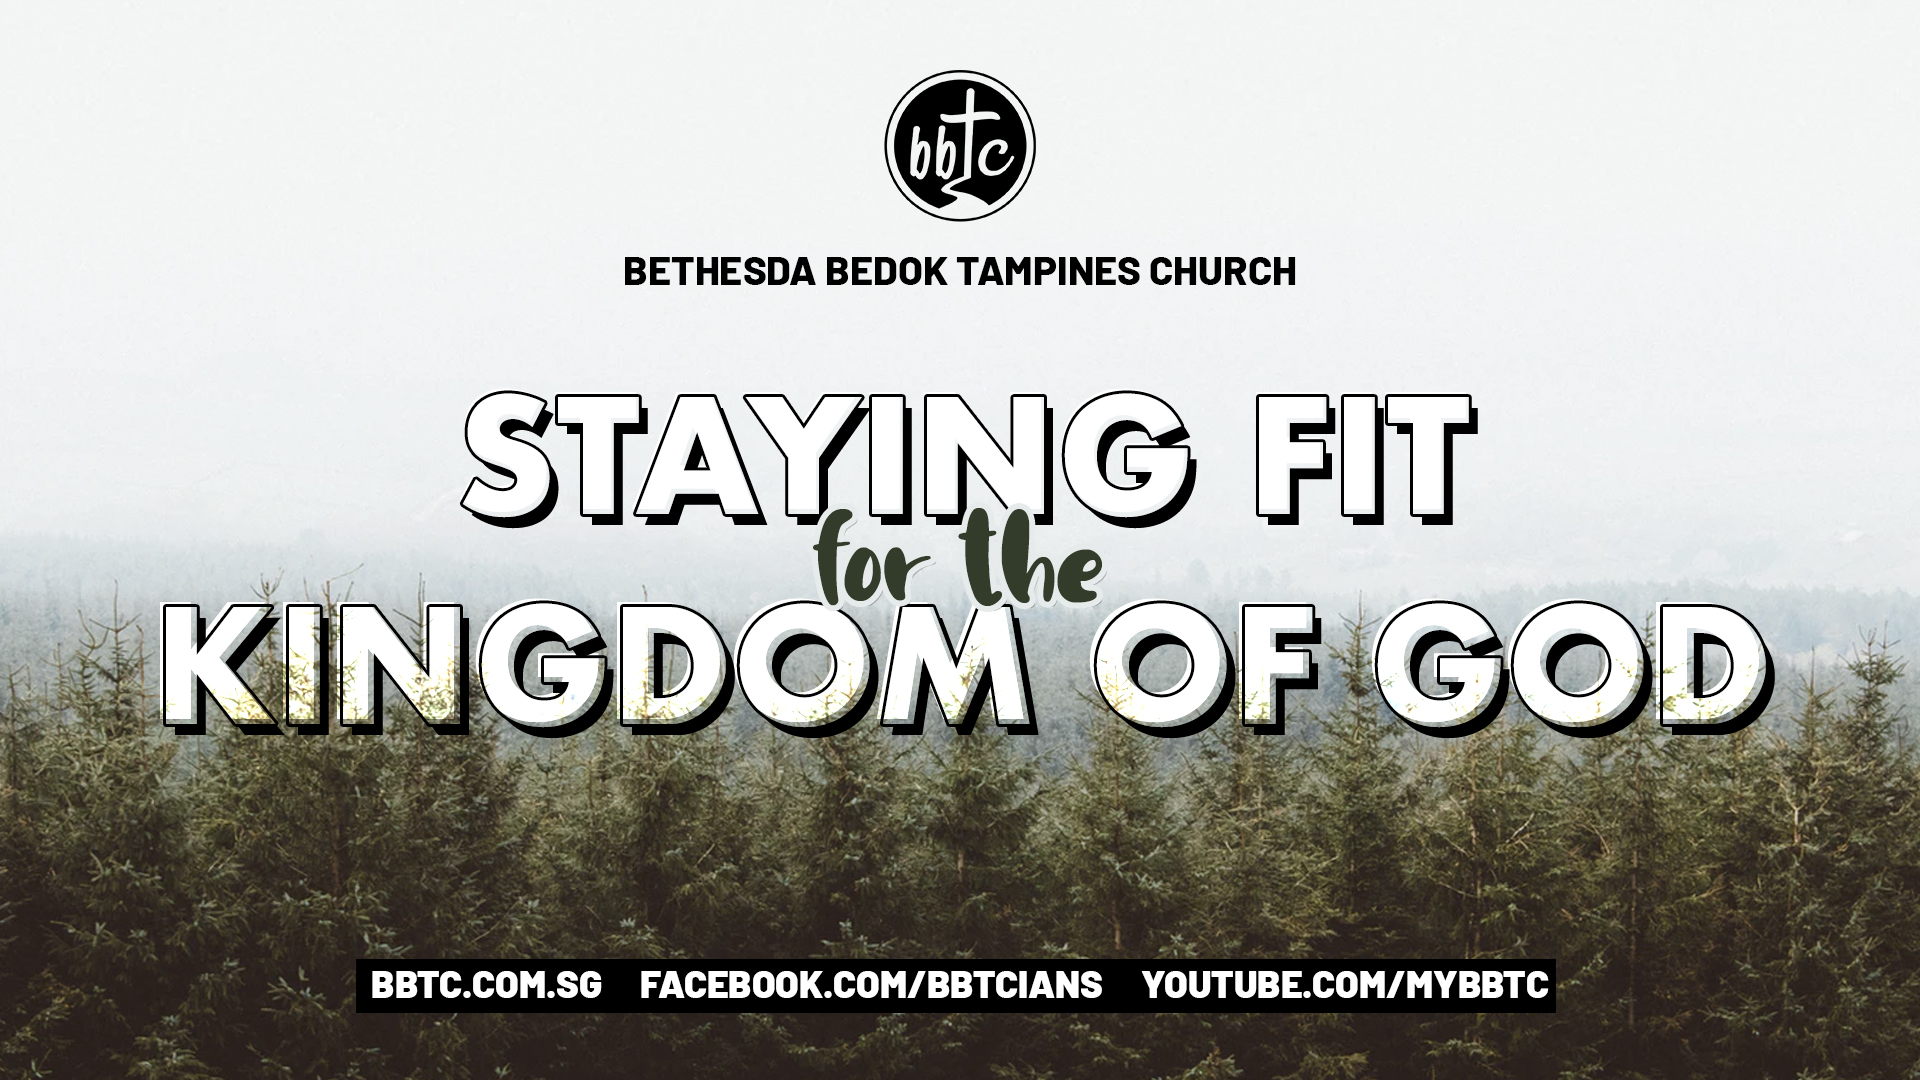 STAYING FIT FOR THE KINGDOM OF GOD